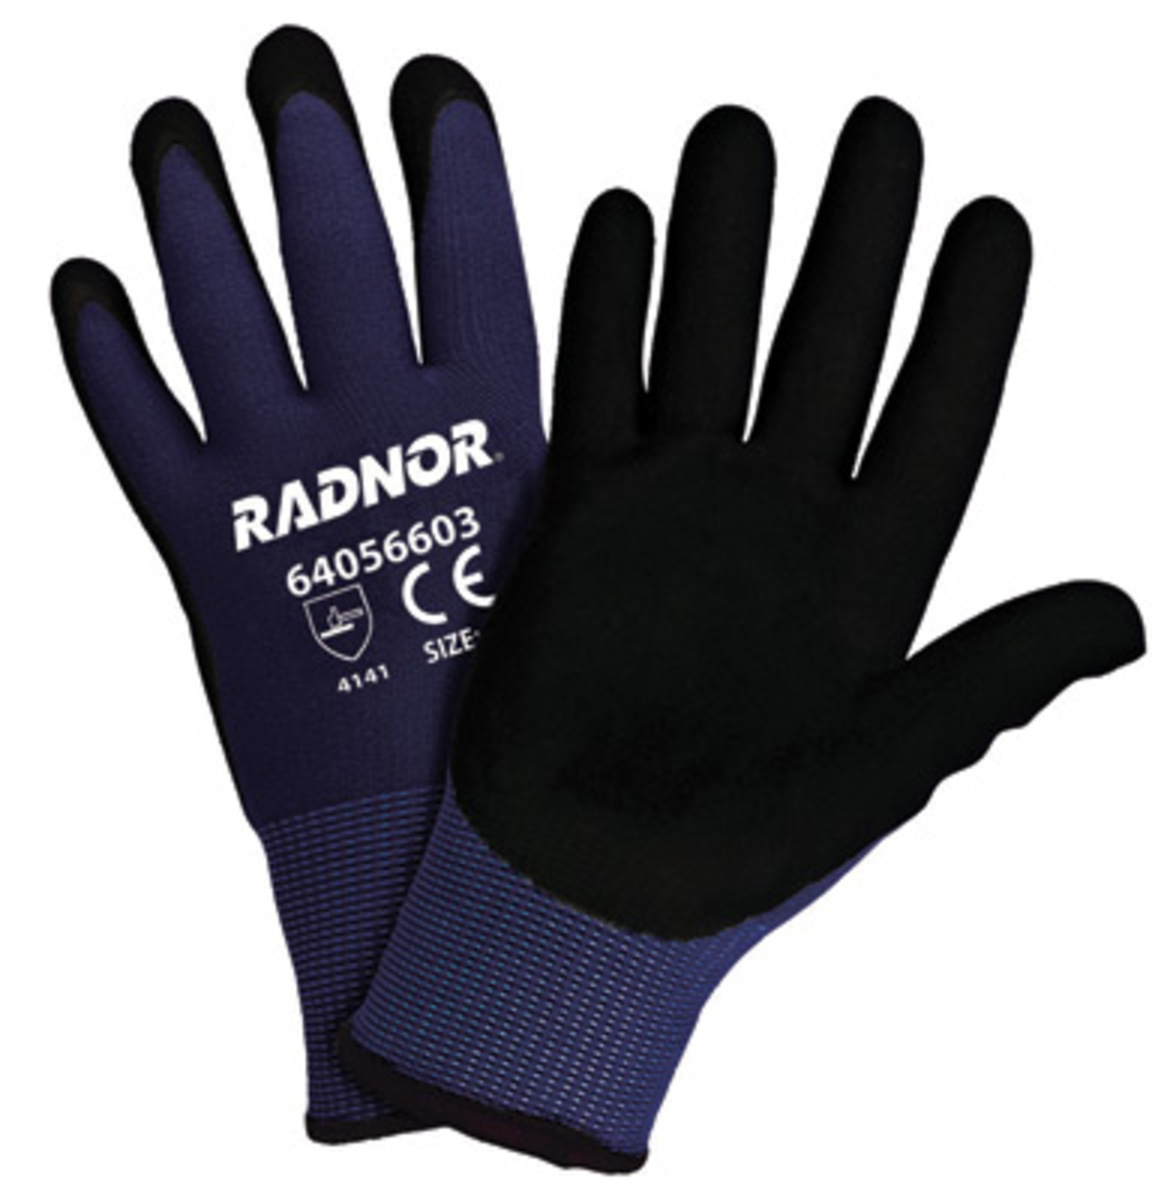 RADNOR® 2X 15 Gauge Black Nitrile And Micro-Foam Palm And Finger Coated Work Gloves With Blue Nylon Liner And Knit Wrist